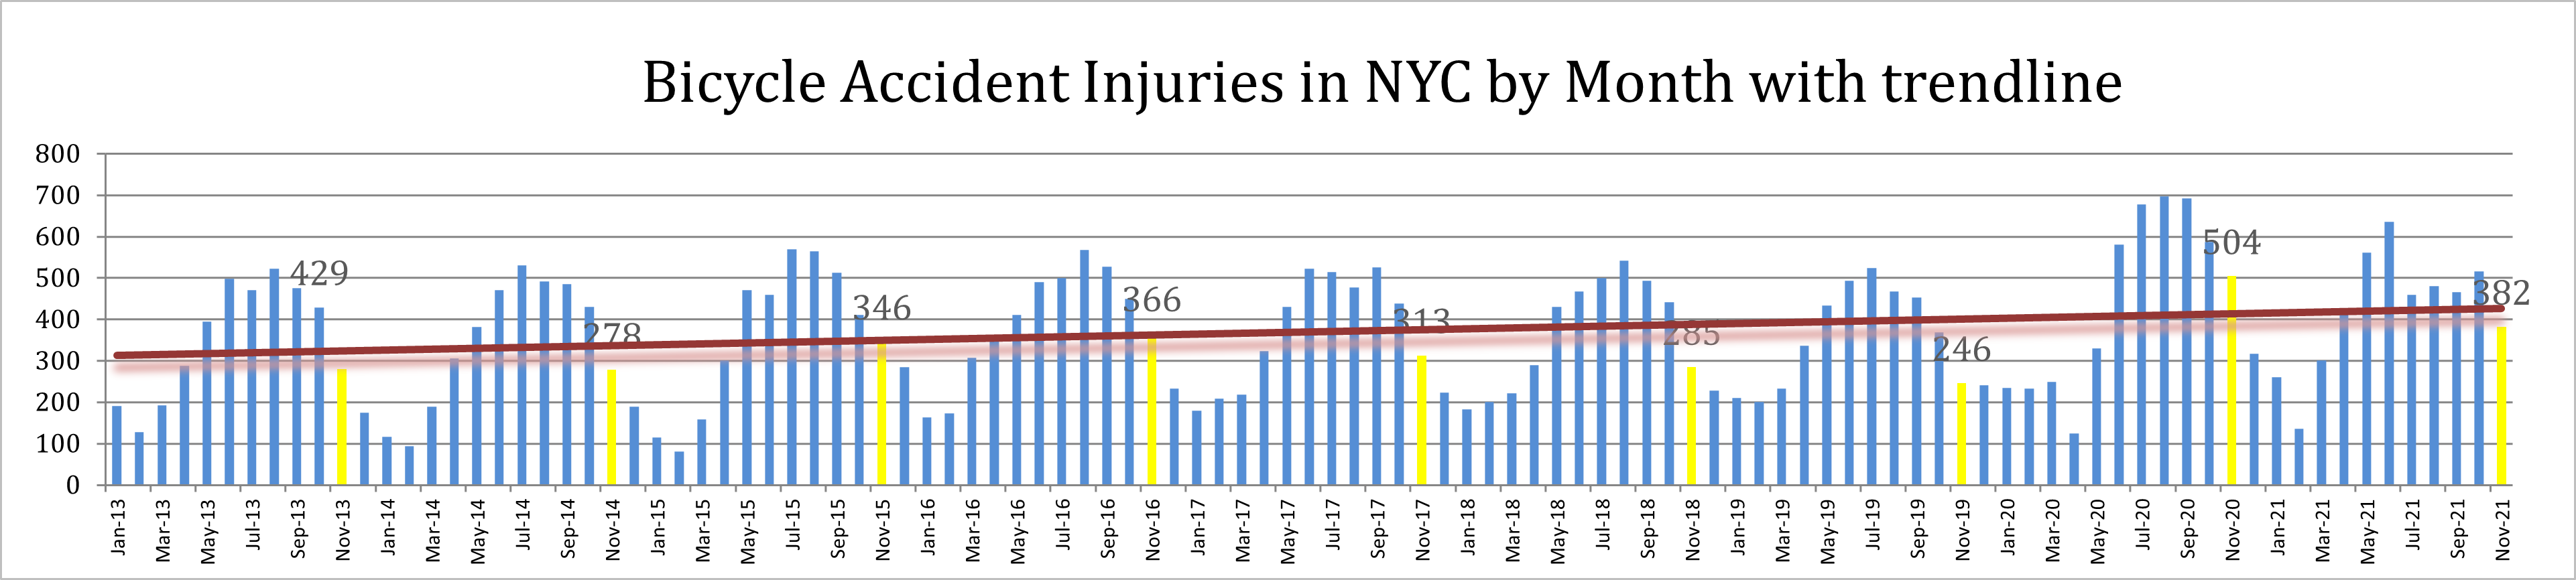 bicycle accident injuries New York 2021 November